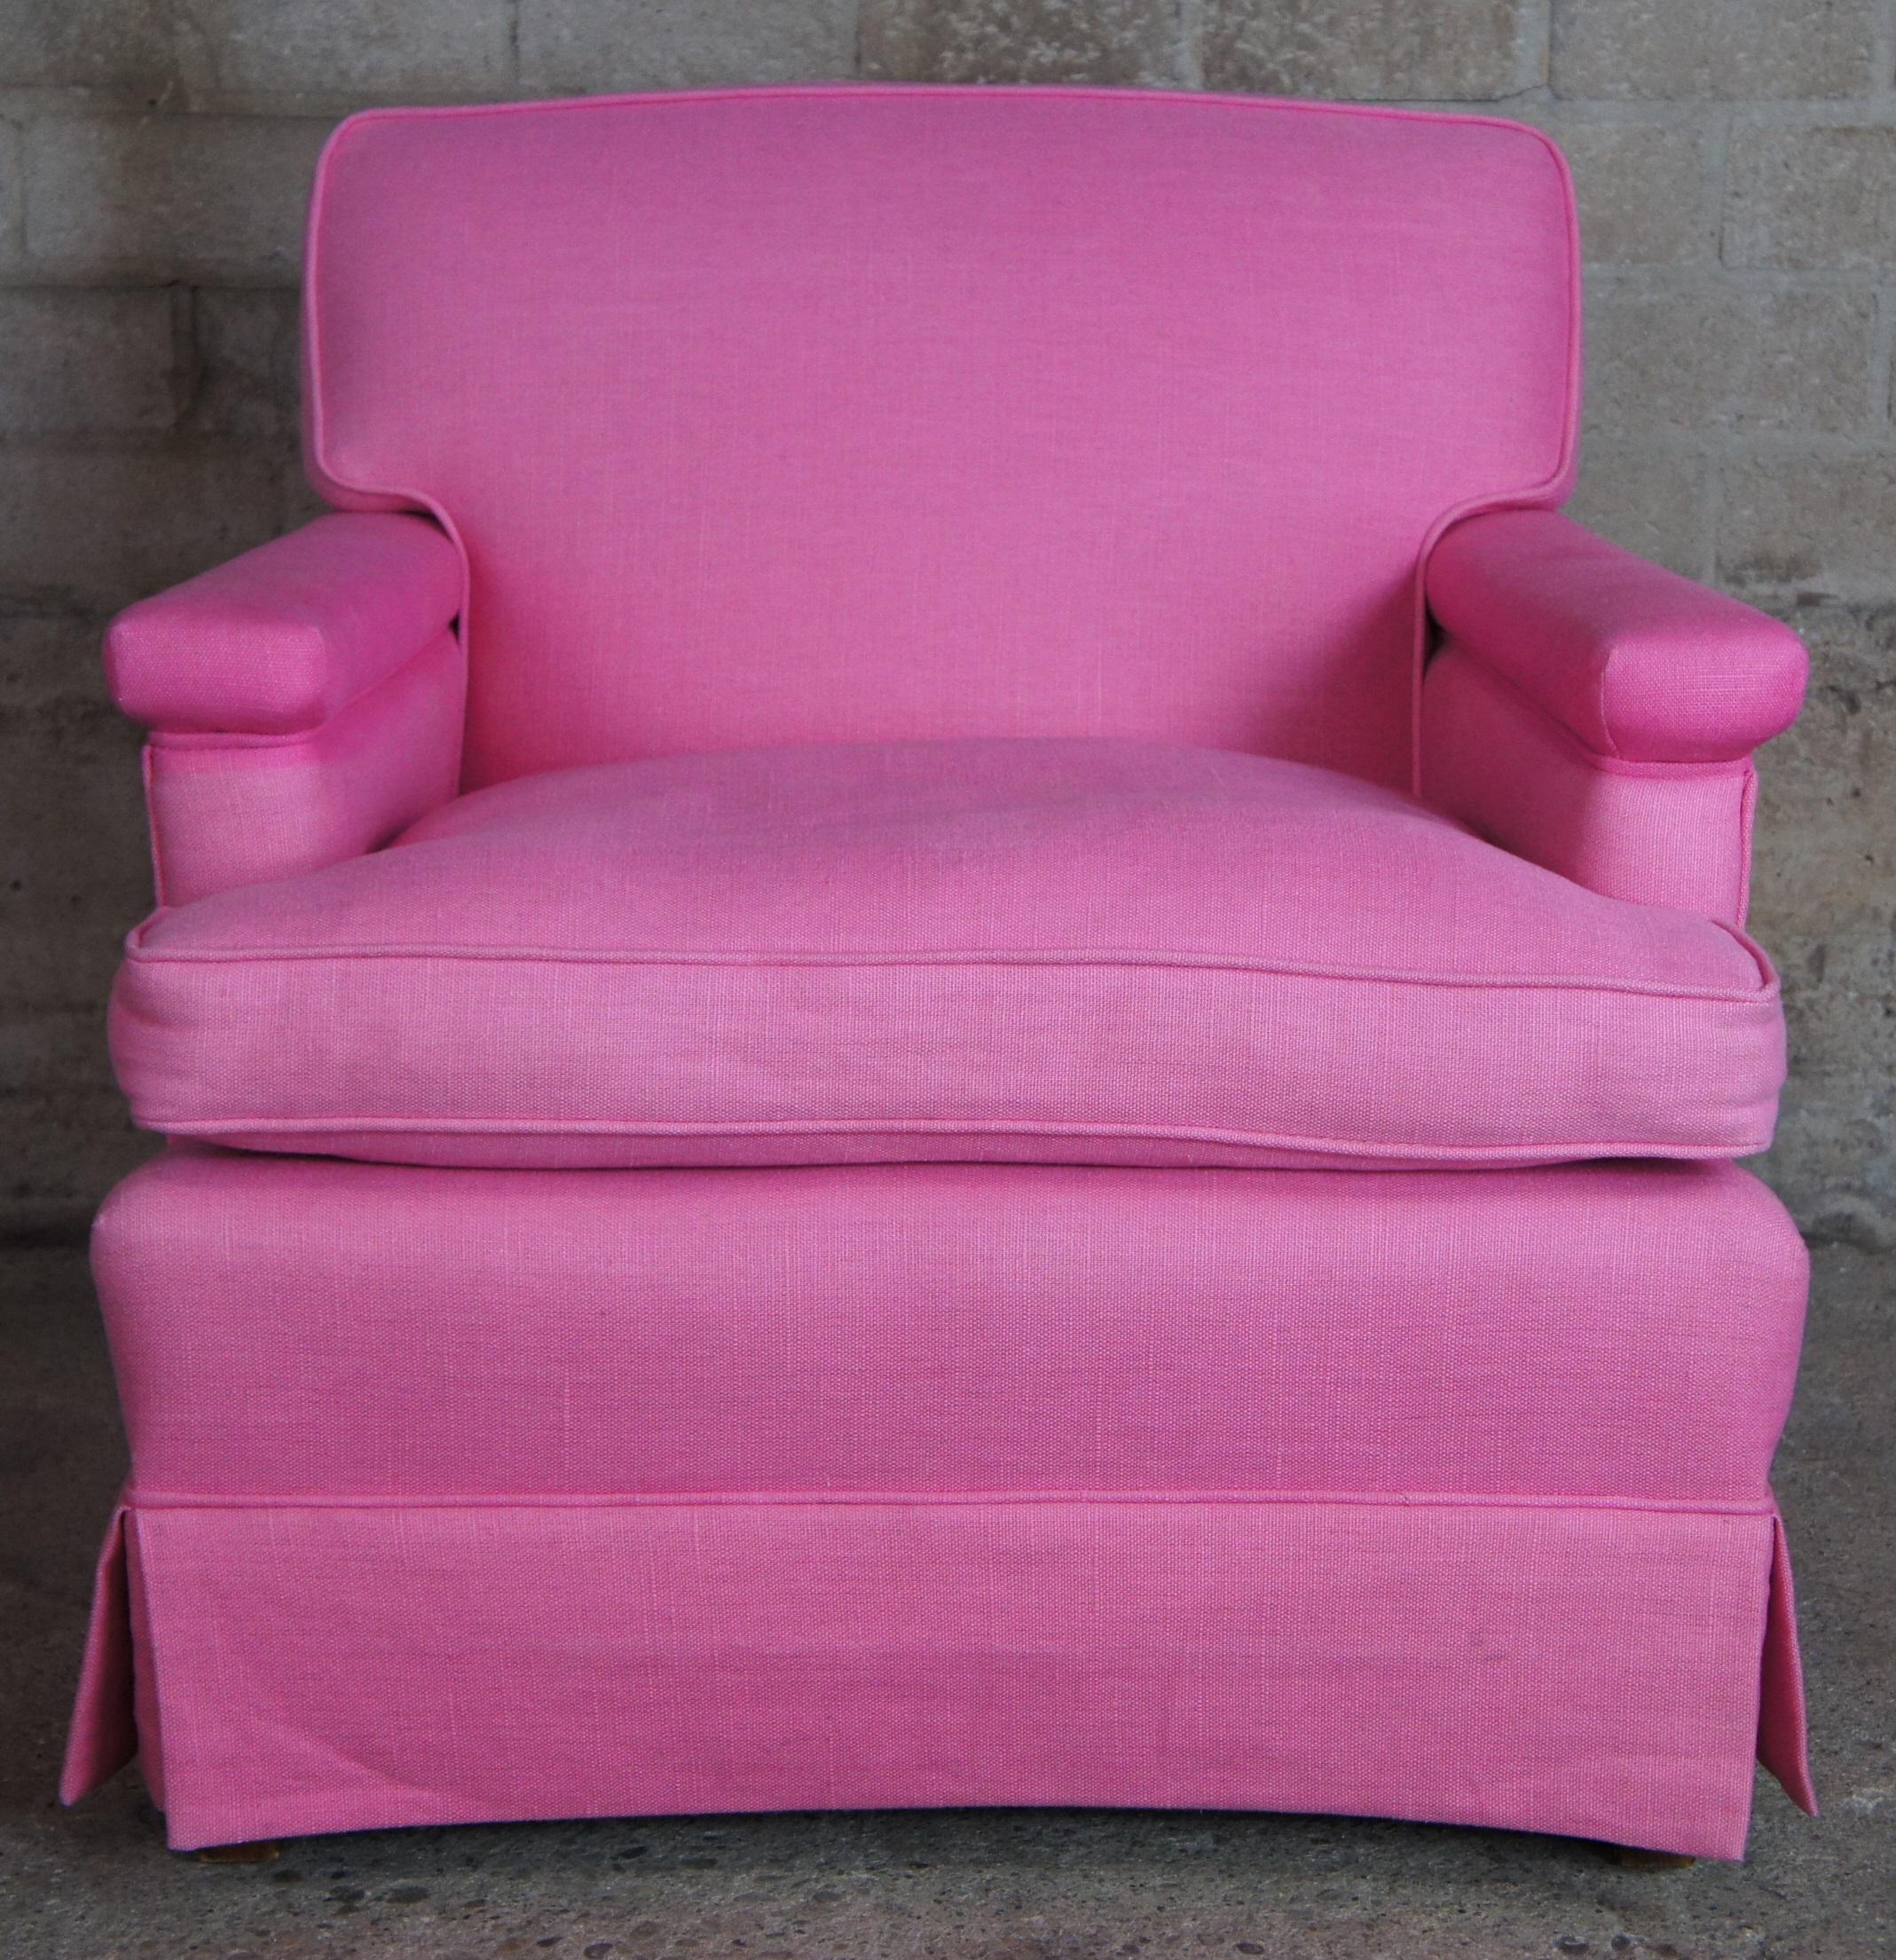 pink oversized chair